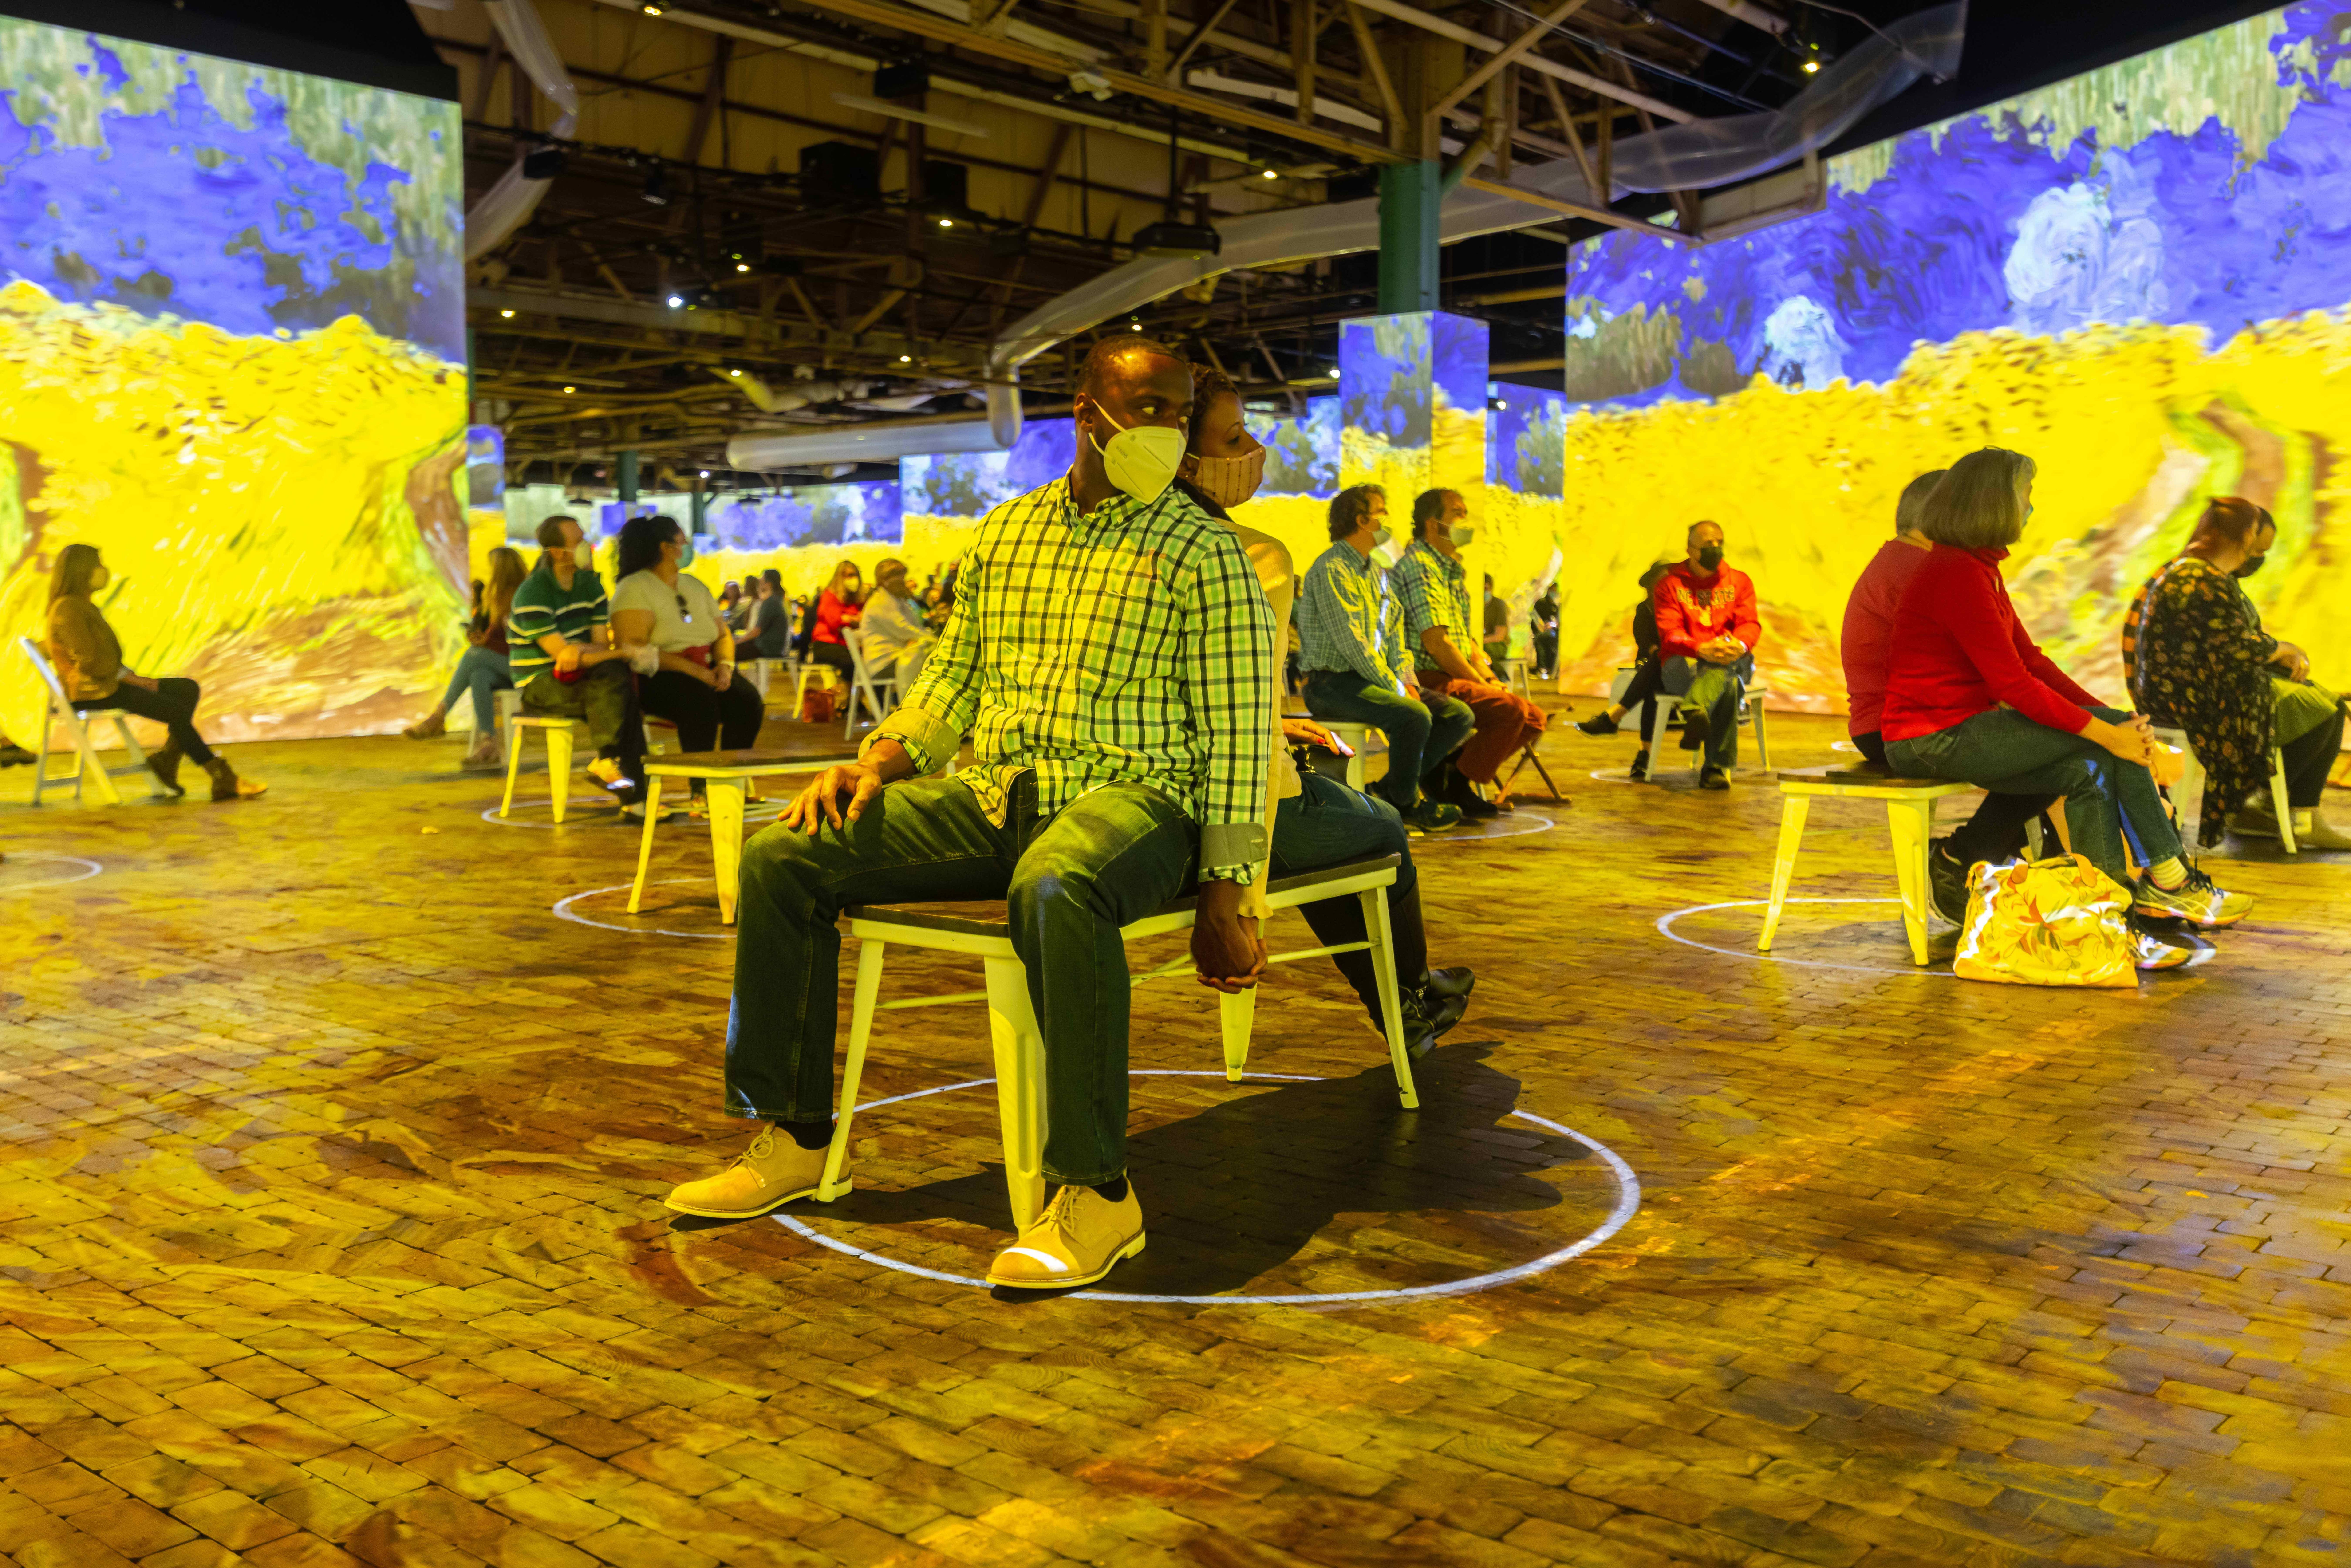 More Info for Immersive Van Gogh Charlotte Extends Through January 2!